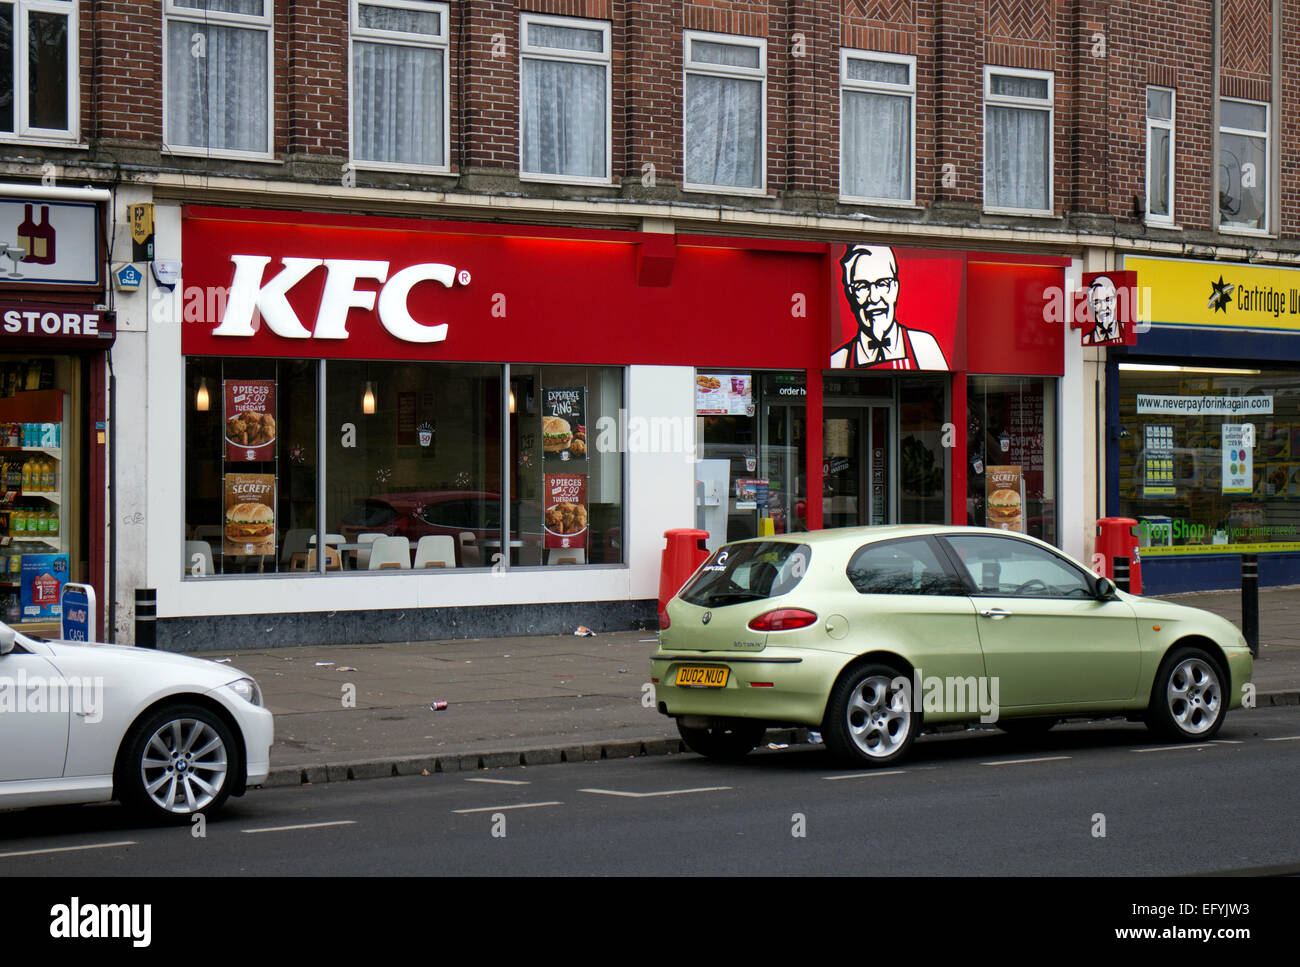 KFC fast food shop in Walsgrave Road, Stoke, Coventry, West Midlands, England, UK Stock Photo